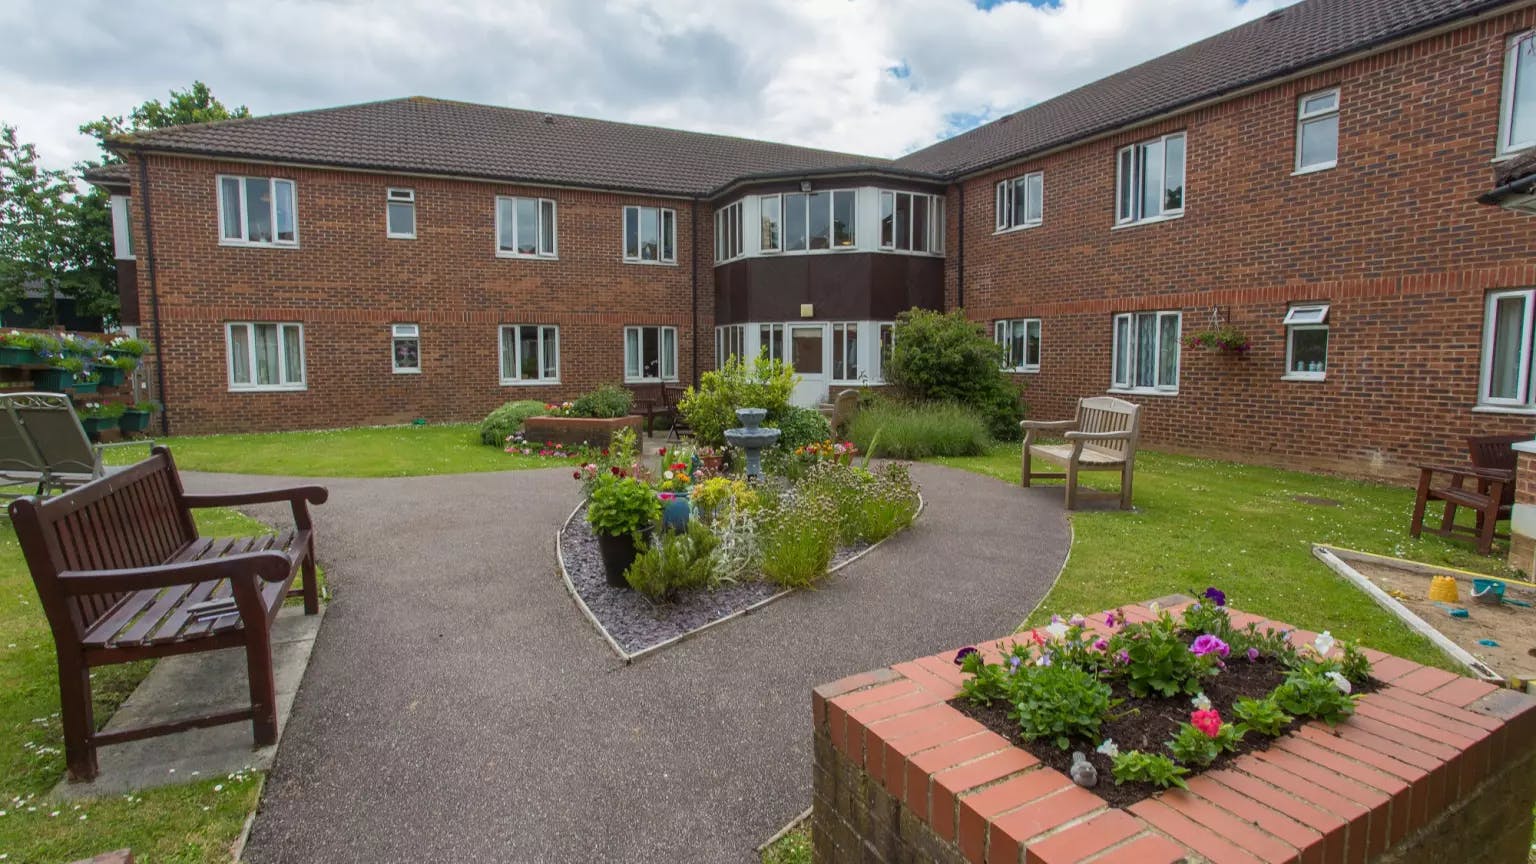 Garden of The Mead care home in Borehamwood, Hertfordshire